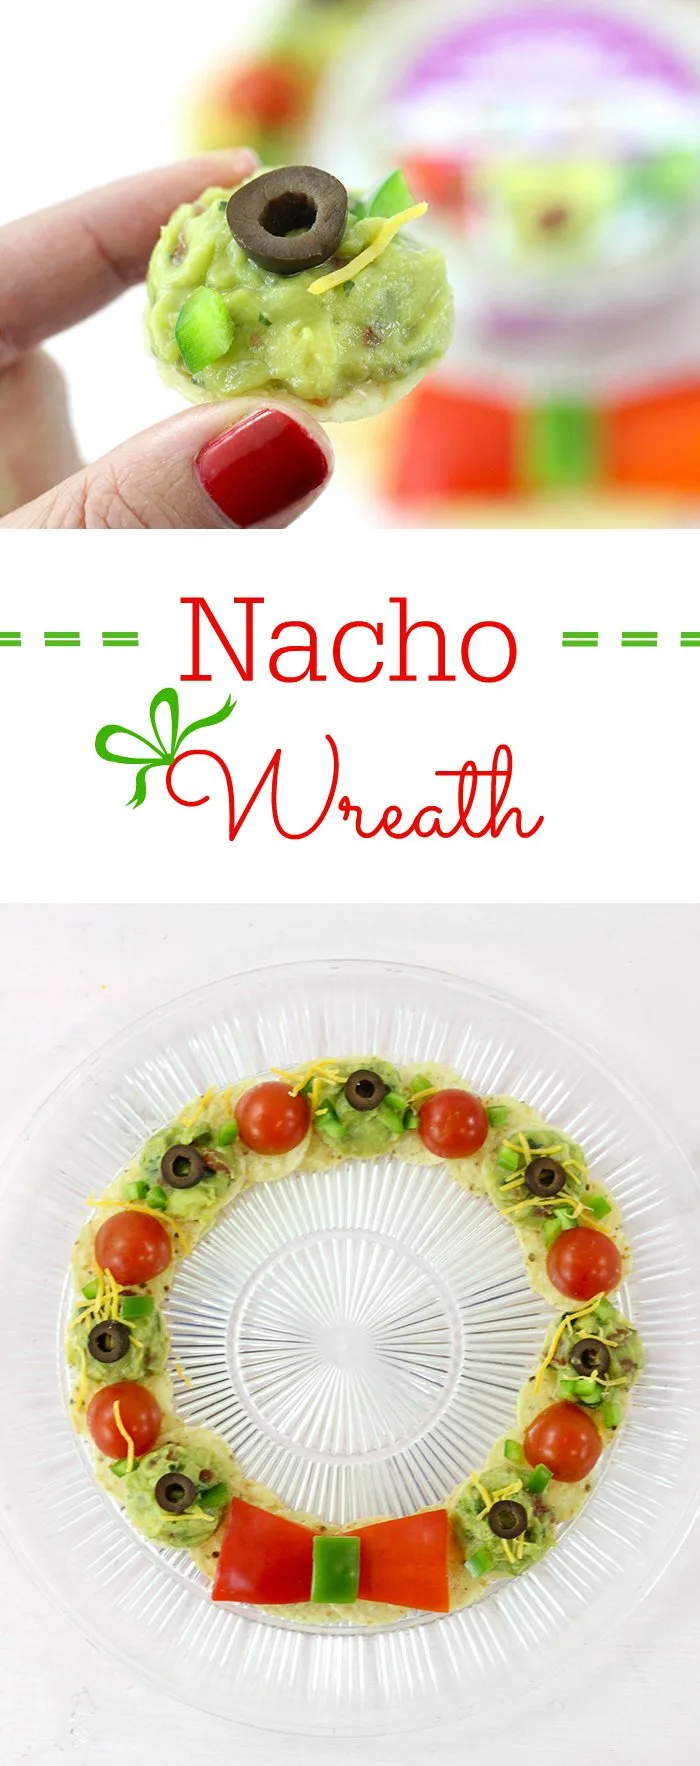 Nacho wreath, for the die hard nacho fans during the holiday season.